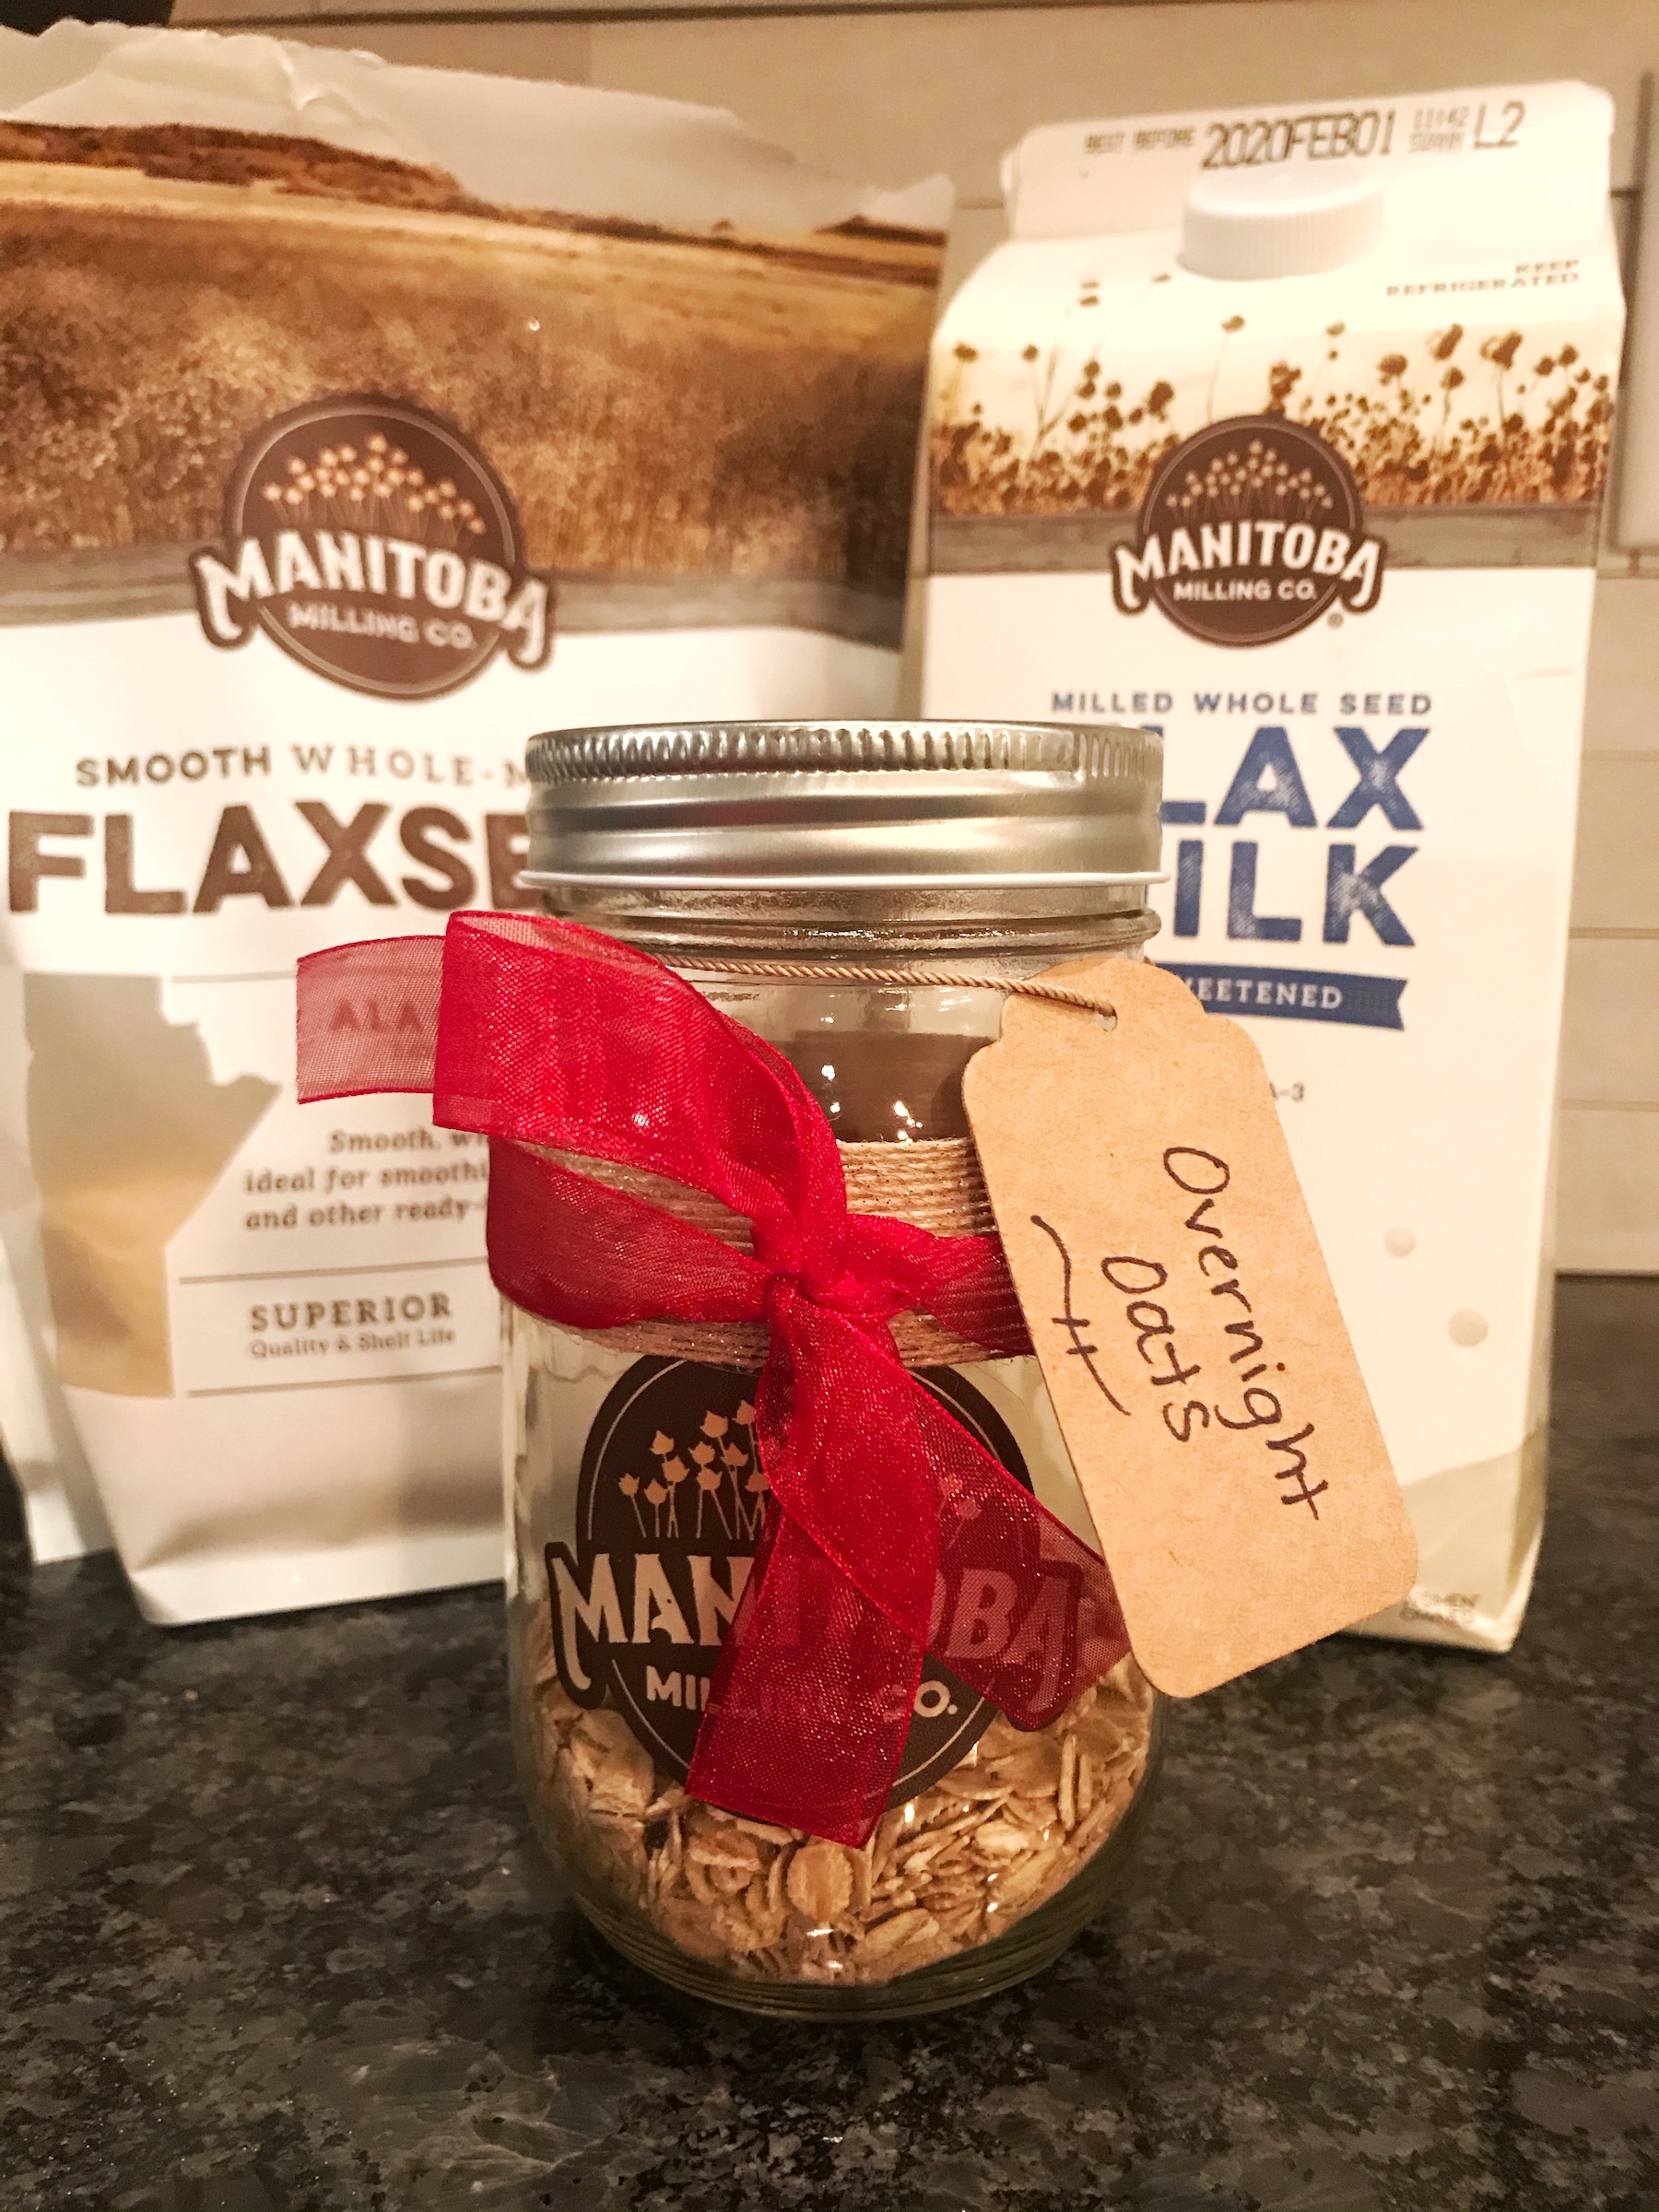 holiday gift idea - put oats in jars and send a recipe for overnight oats